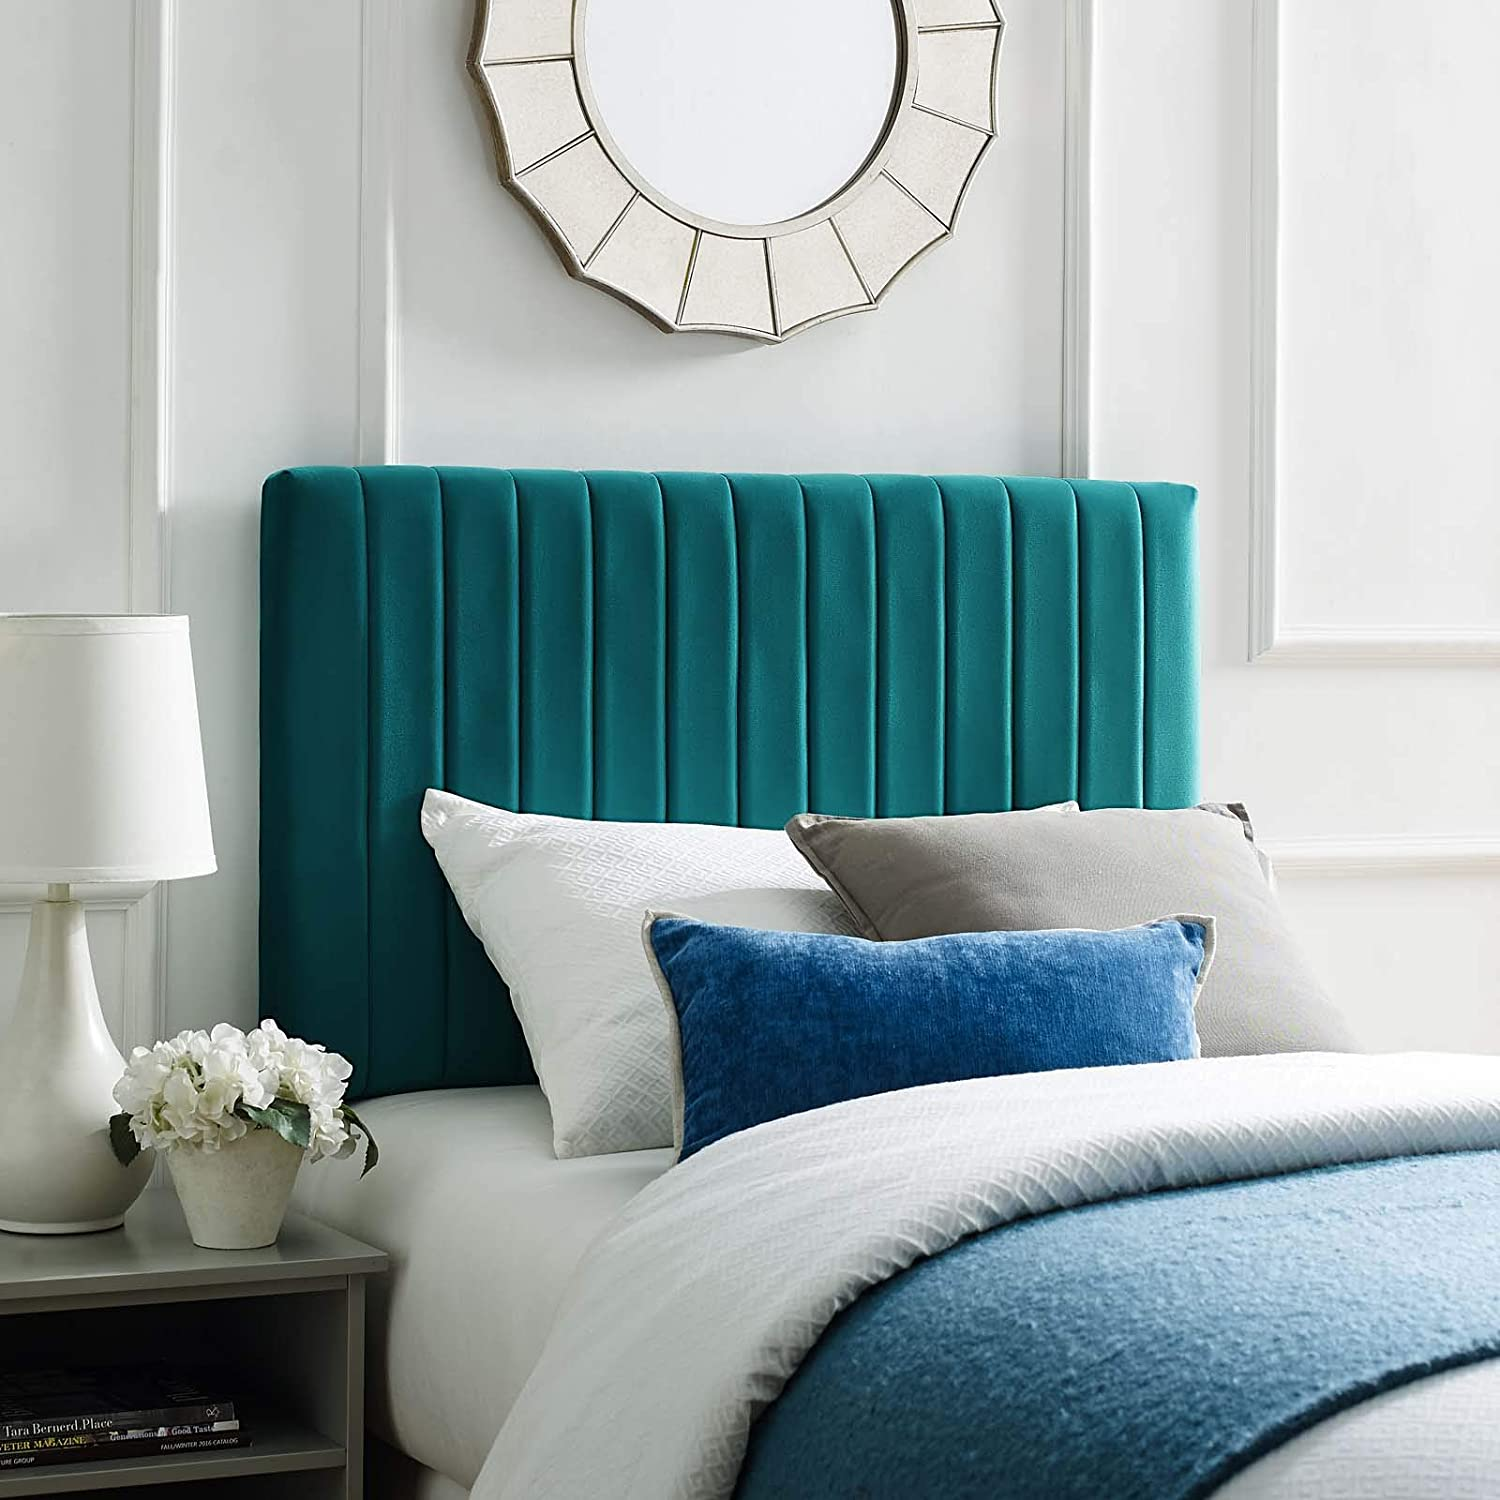 You need a taller headboard for a more prominent look